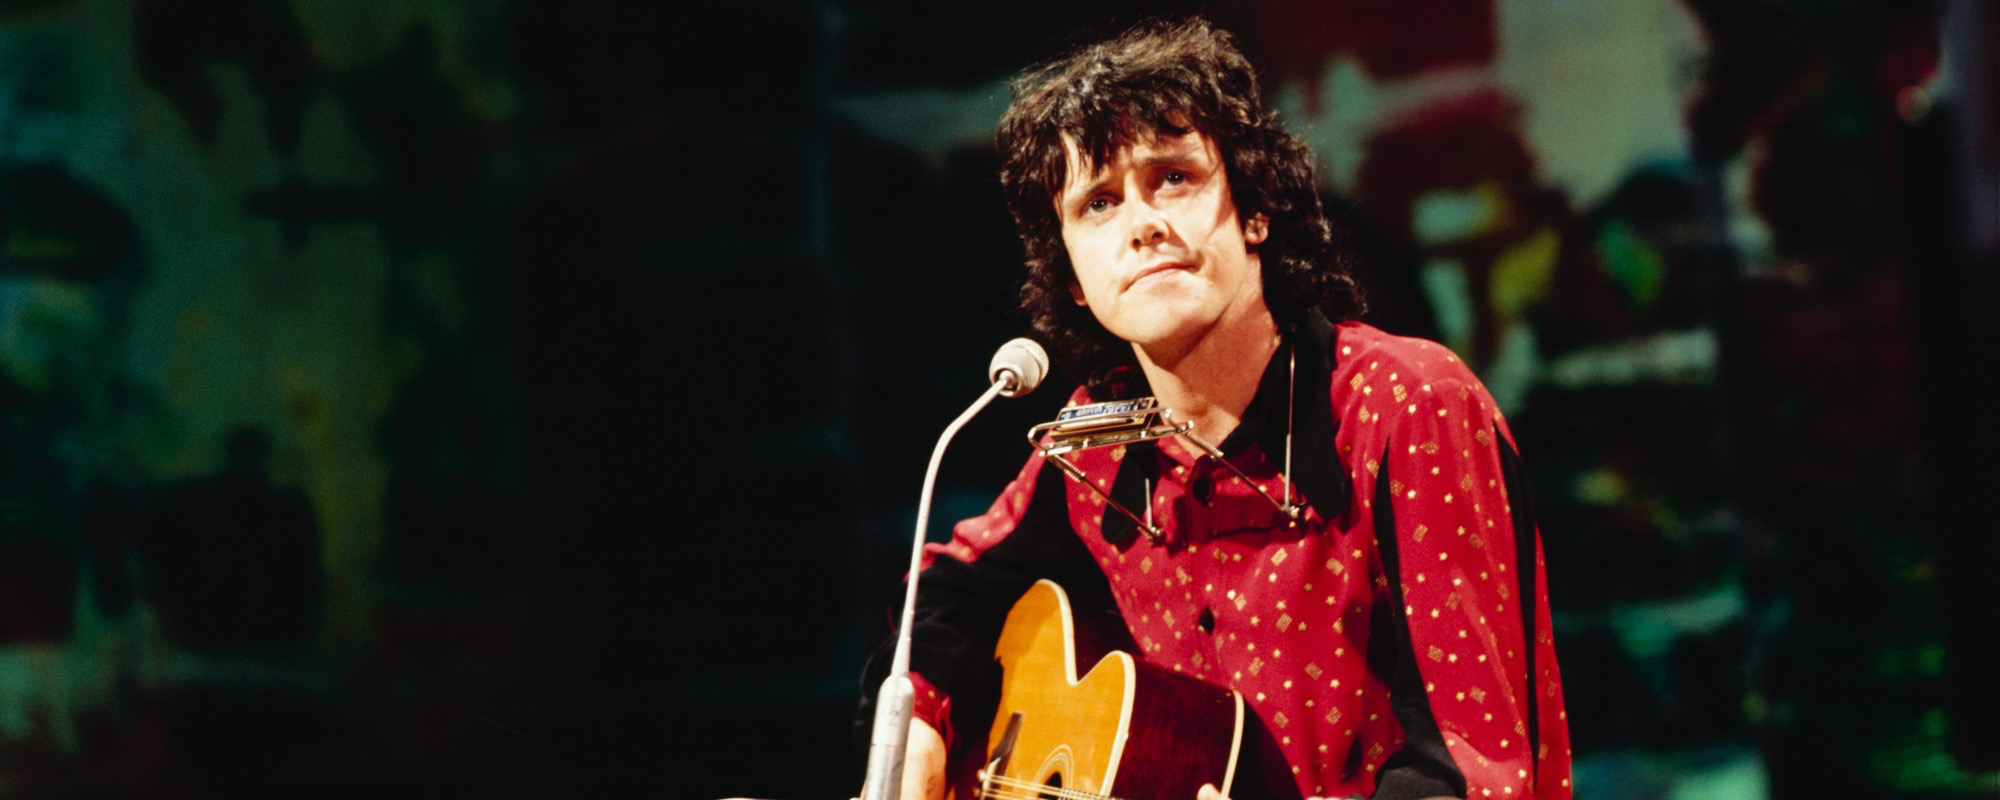 The Oft-Misinterpreted Meaning Behind Donovan’s Psychedelic Hit “Sunshine Superman”